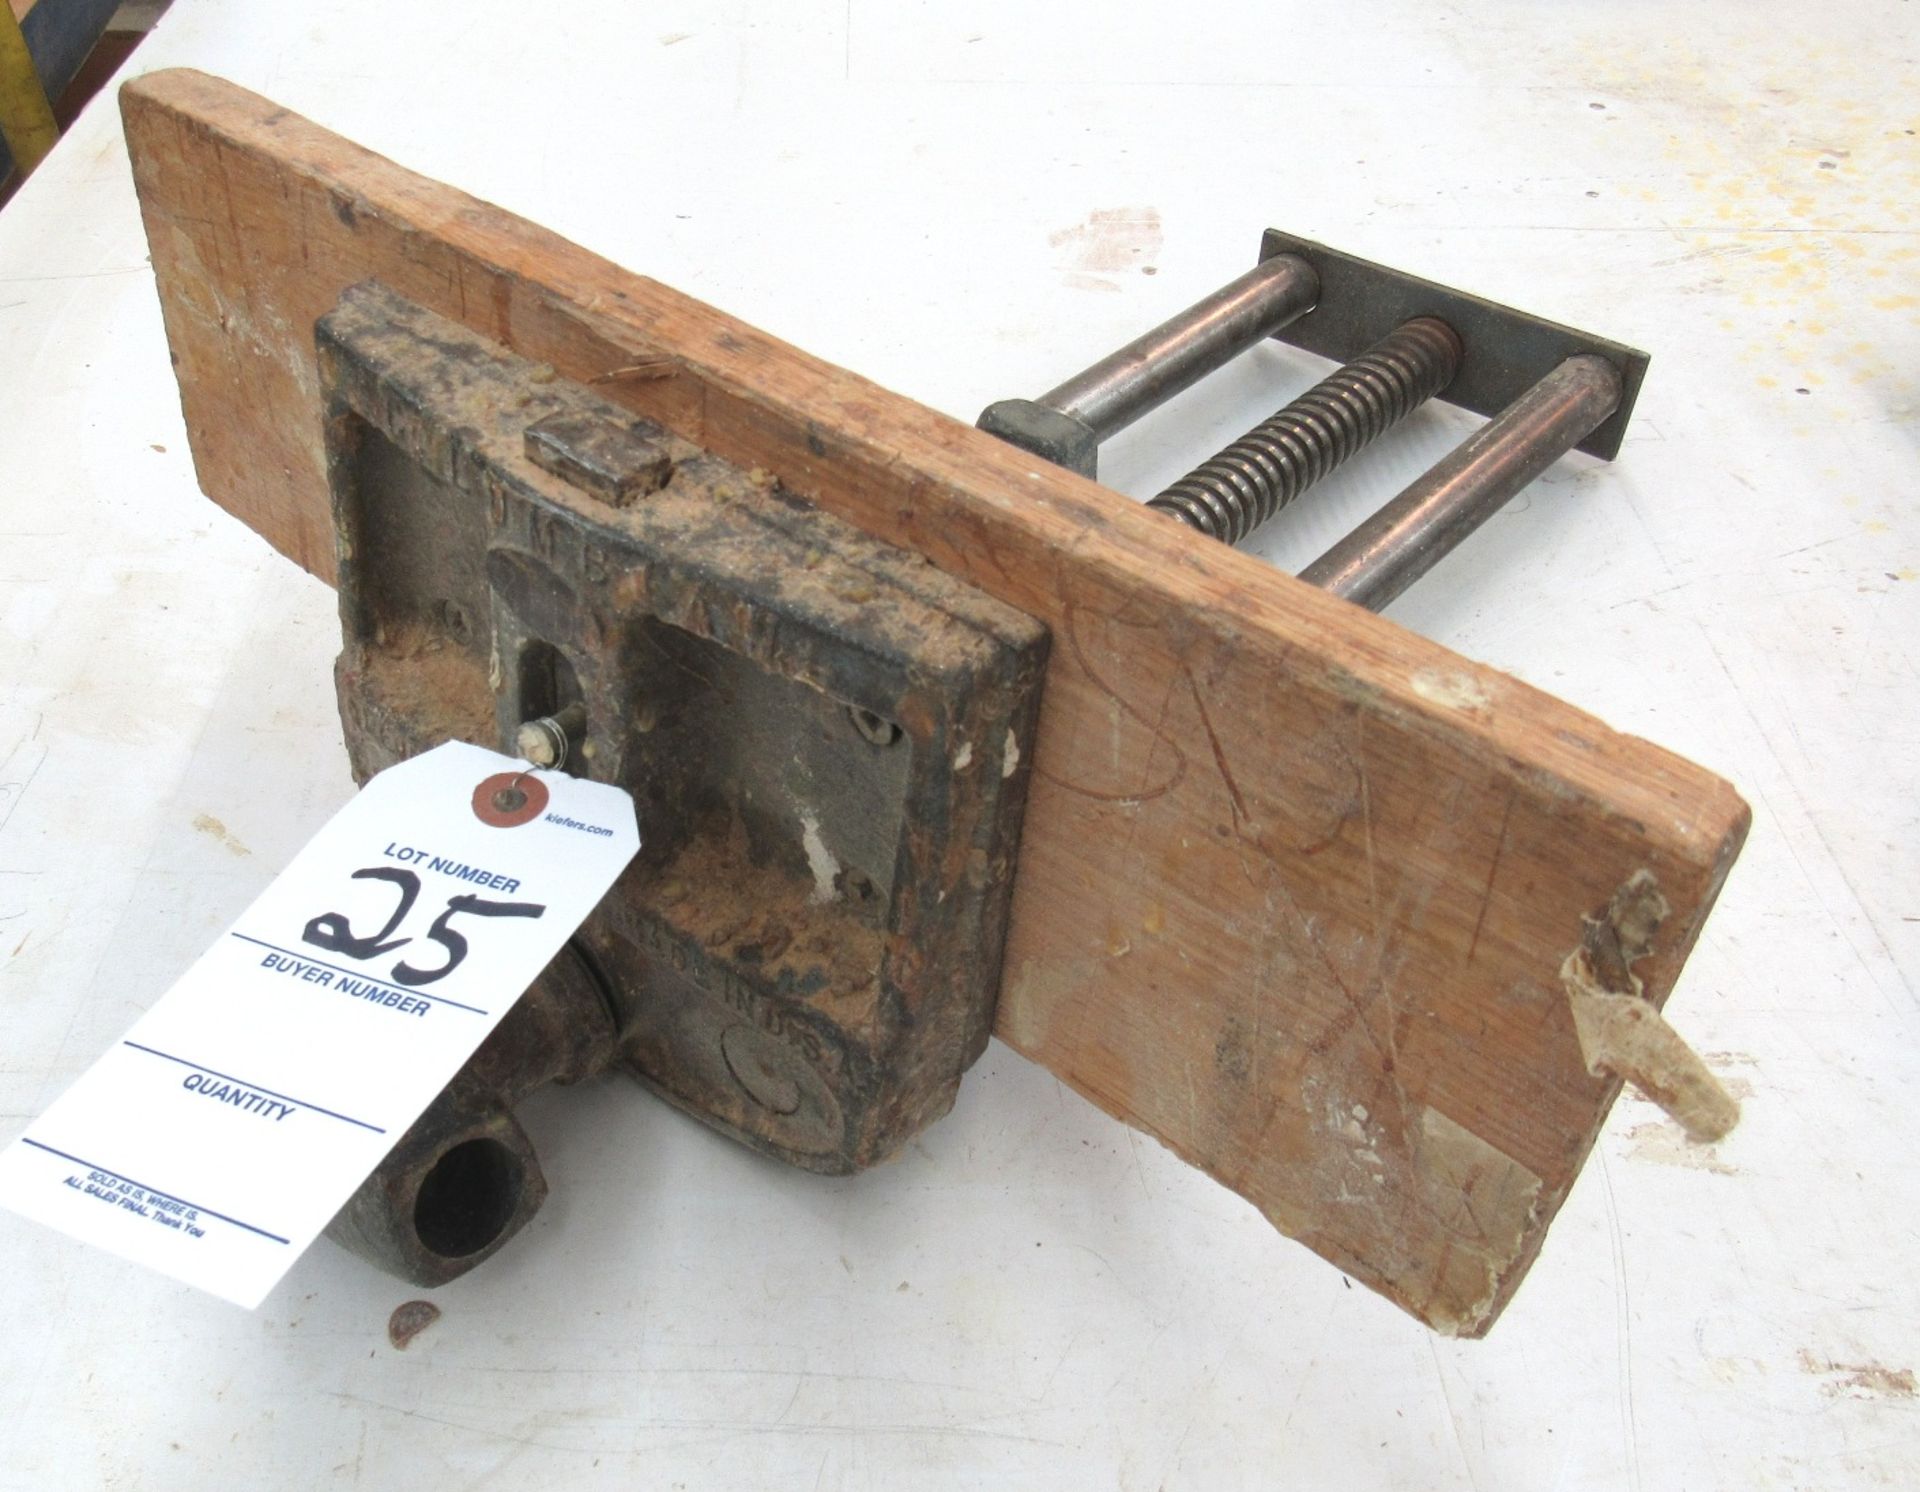 7" Columbian No.7RD Woodworking Vise